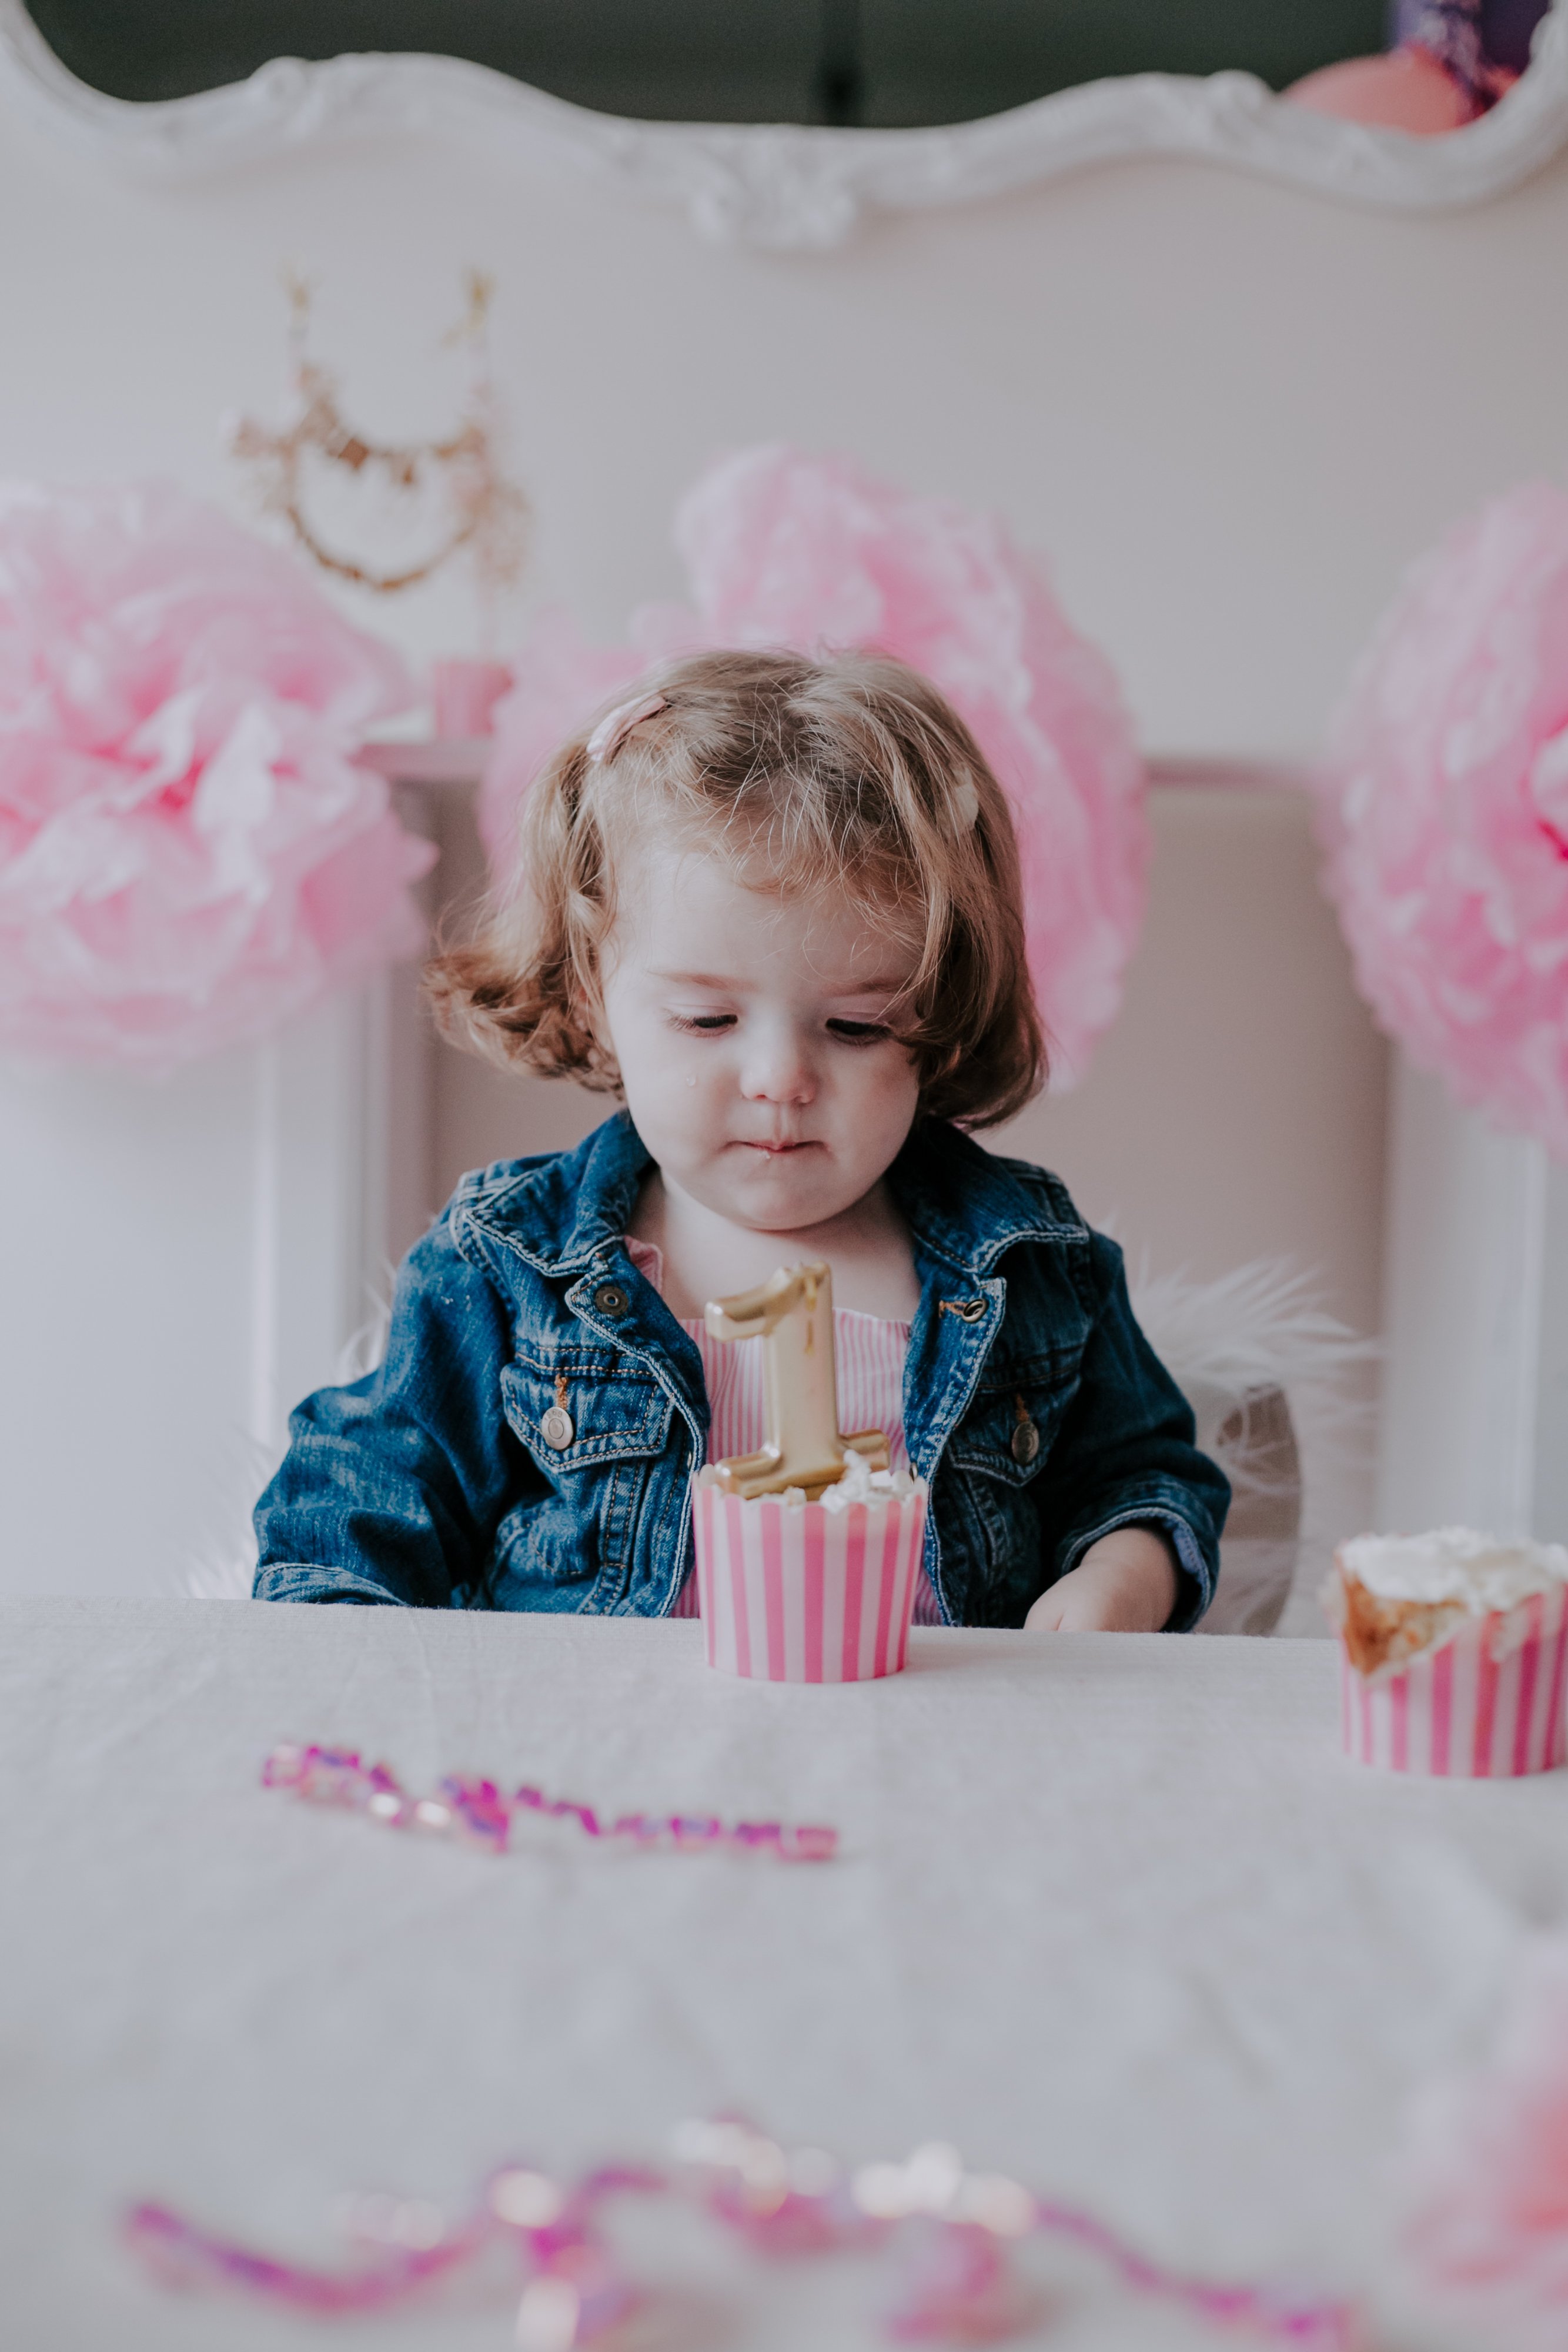 One-year-old photographed by Olive Studio with her birthday cupcakes at Cake Smash Session. 